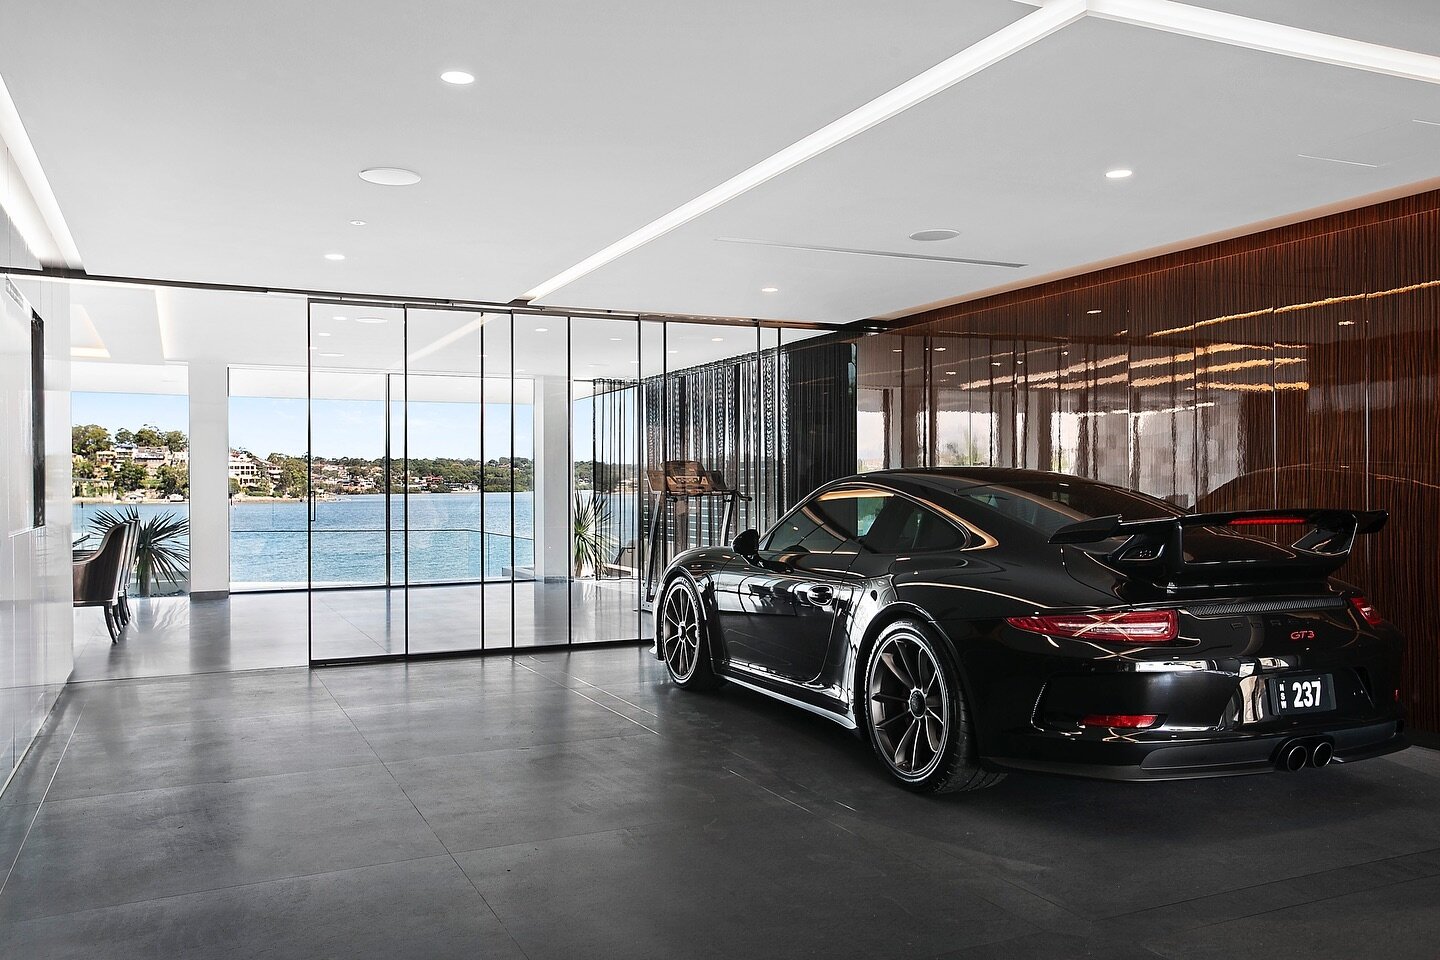 When luxury meets durability: TITONI steel windows and doors, the Porsche of home design.

To see more revolutionizing designs visit our website in the bio! 

#revolutionizingdesign #titoniwindows #highendliving #miamibeach #miamiarchitecture #steeld